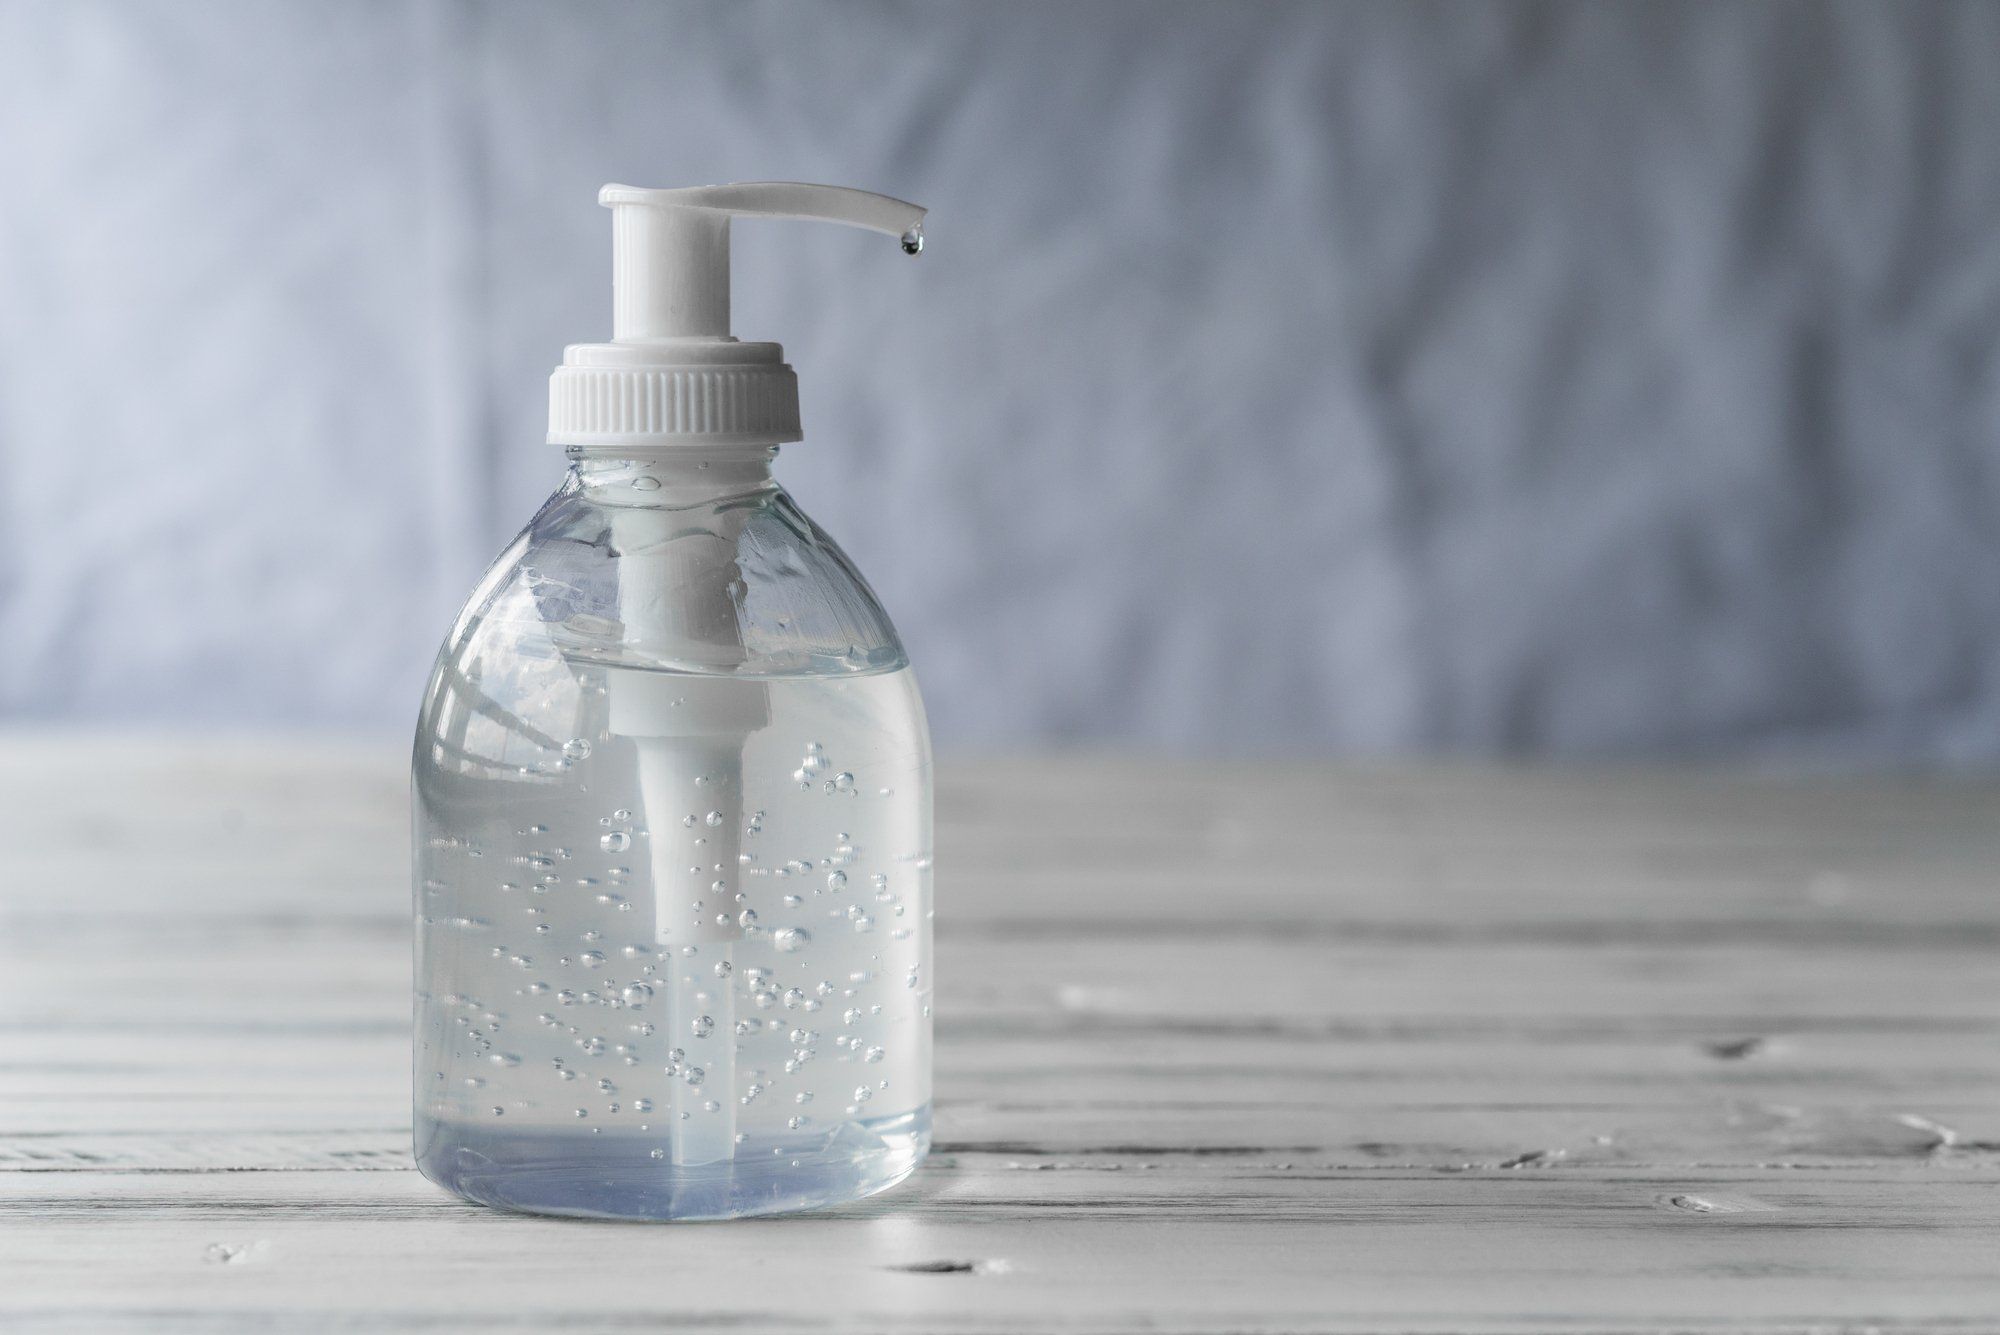 CVS hand sanitizer does not kill 99.9% of germs, a class action lawsuit claims.